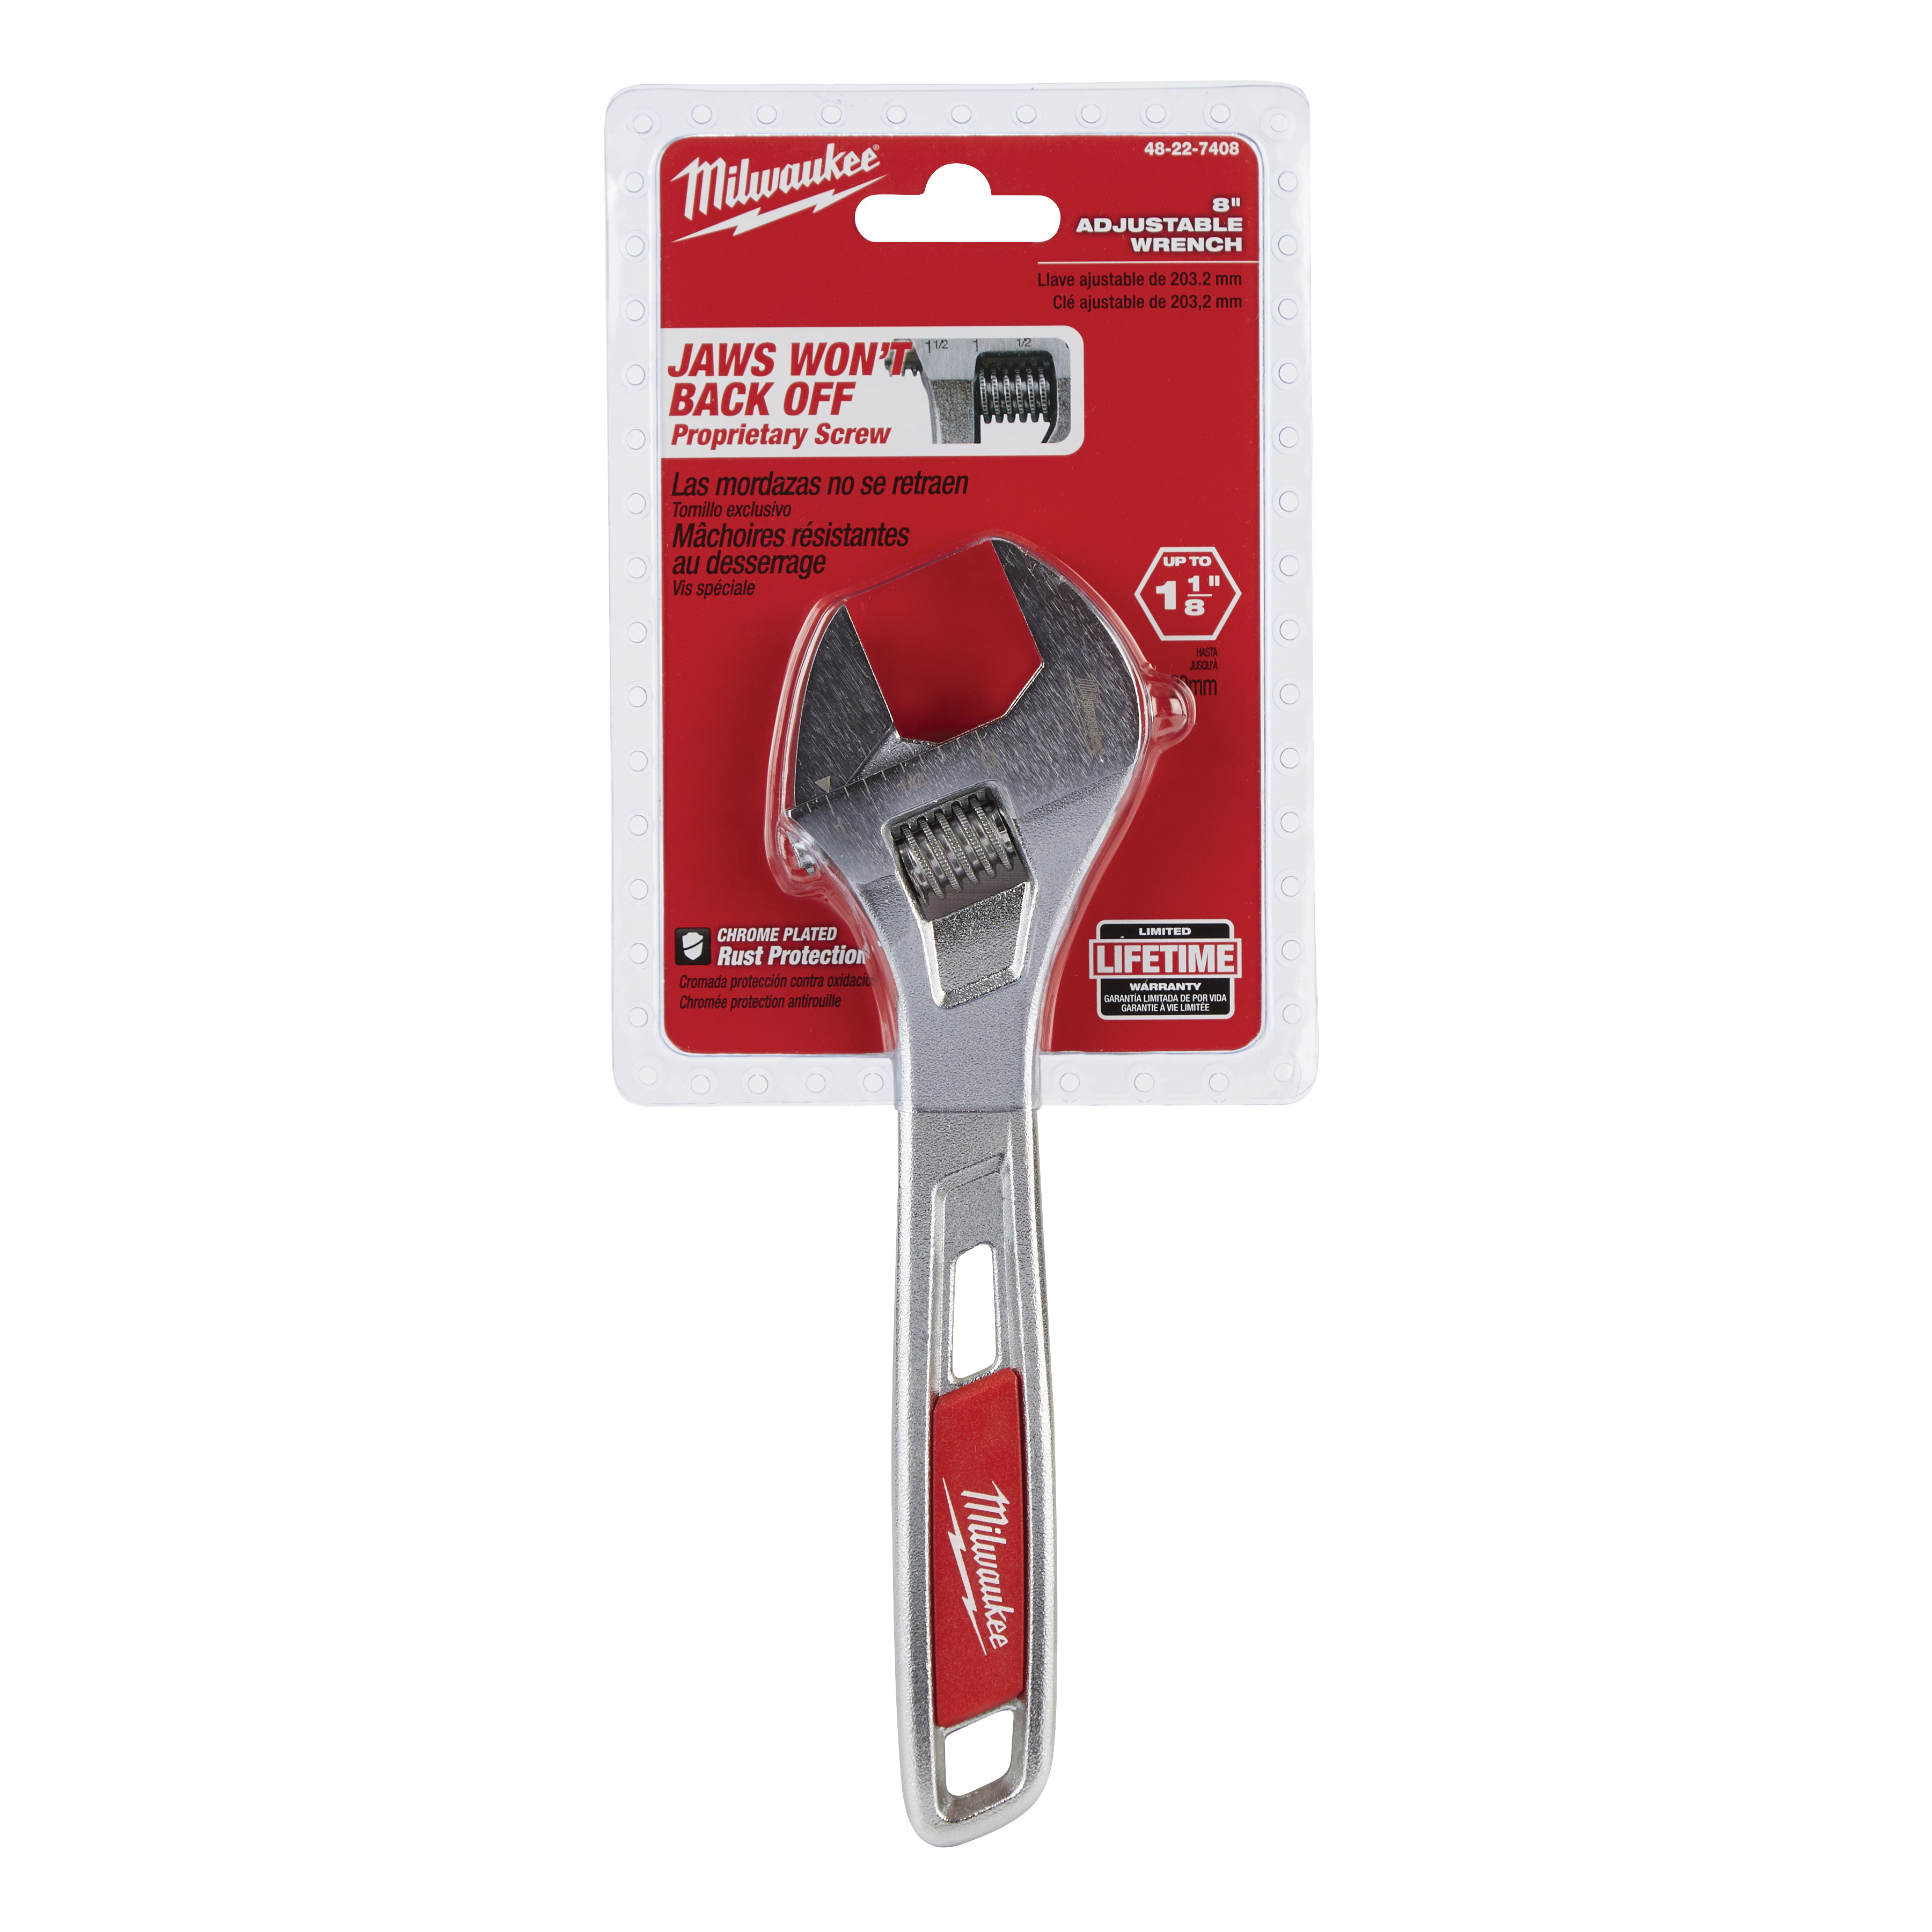 48-22-7408 Adjustable Wrench, 8 in OAL, 1-1/8 in Jaw, Steel, Chrome, Ergonomic Handle